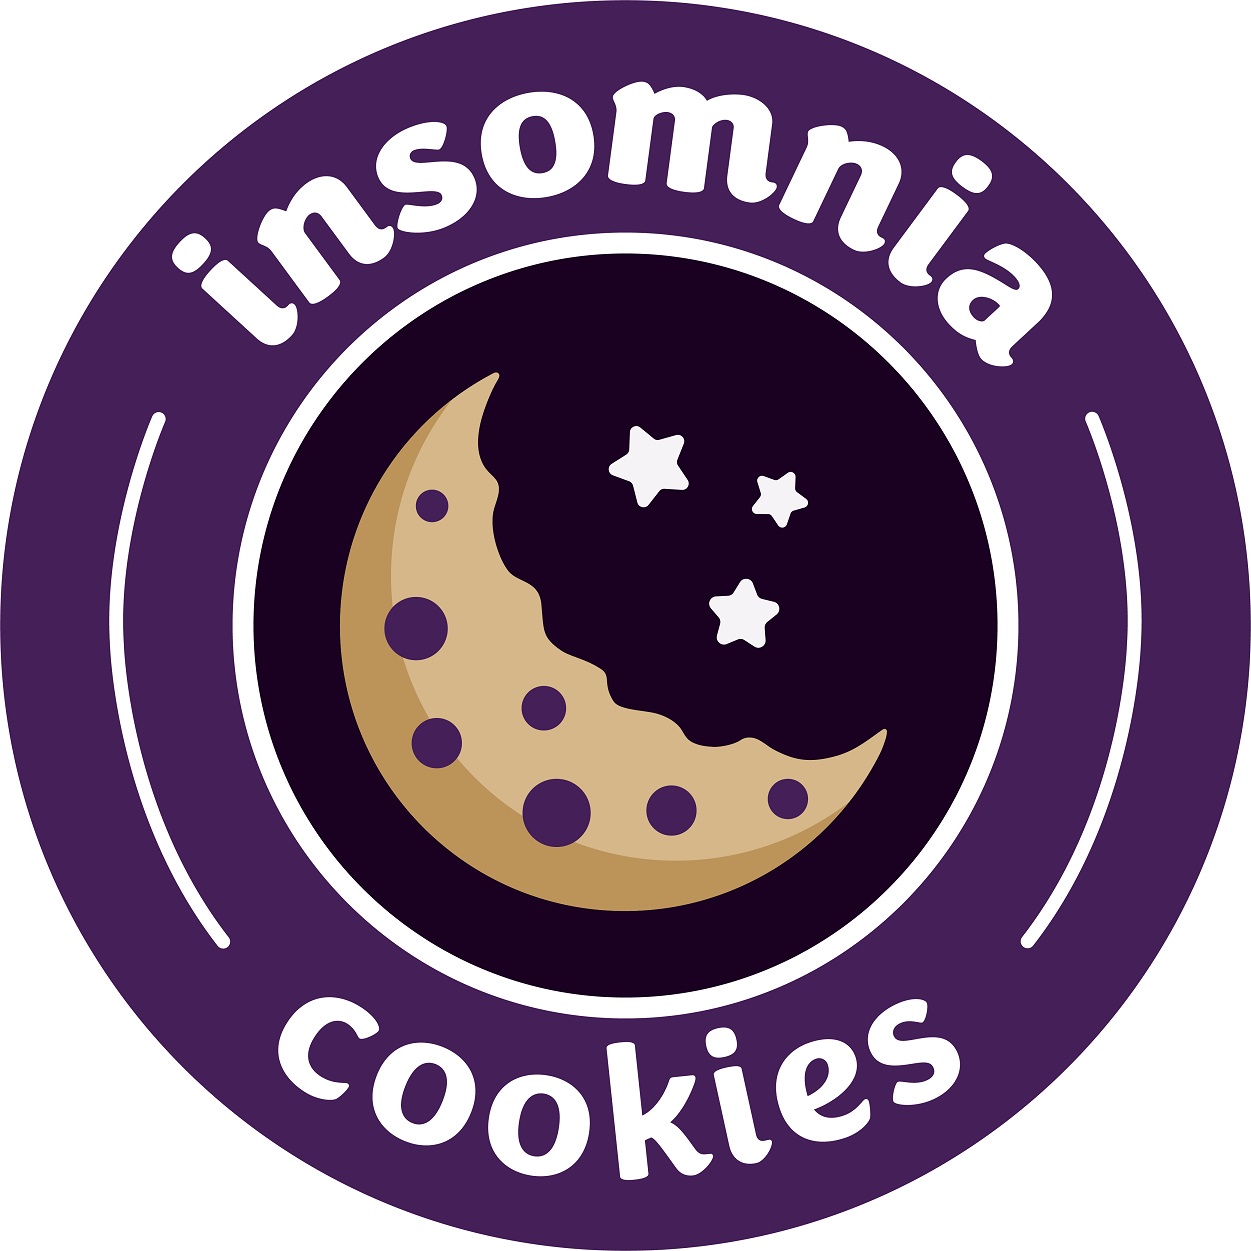 College Press Releases Insomnia Invites College Students to Own the Night at Annual PJ Party